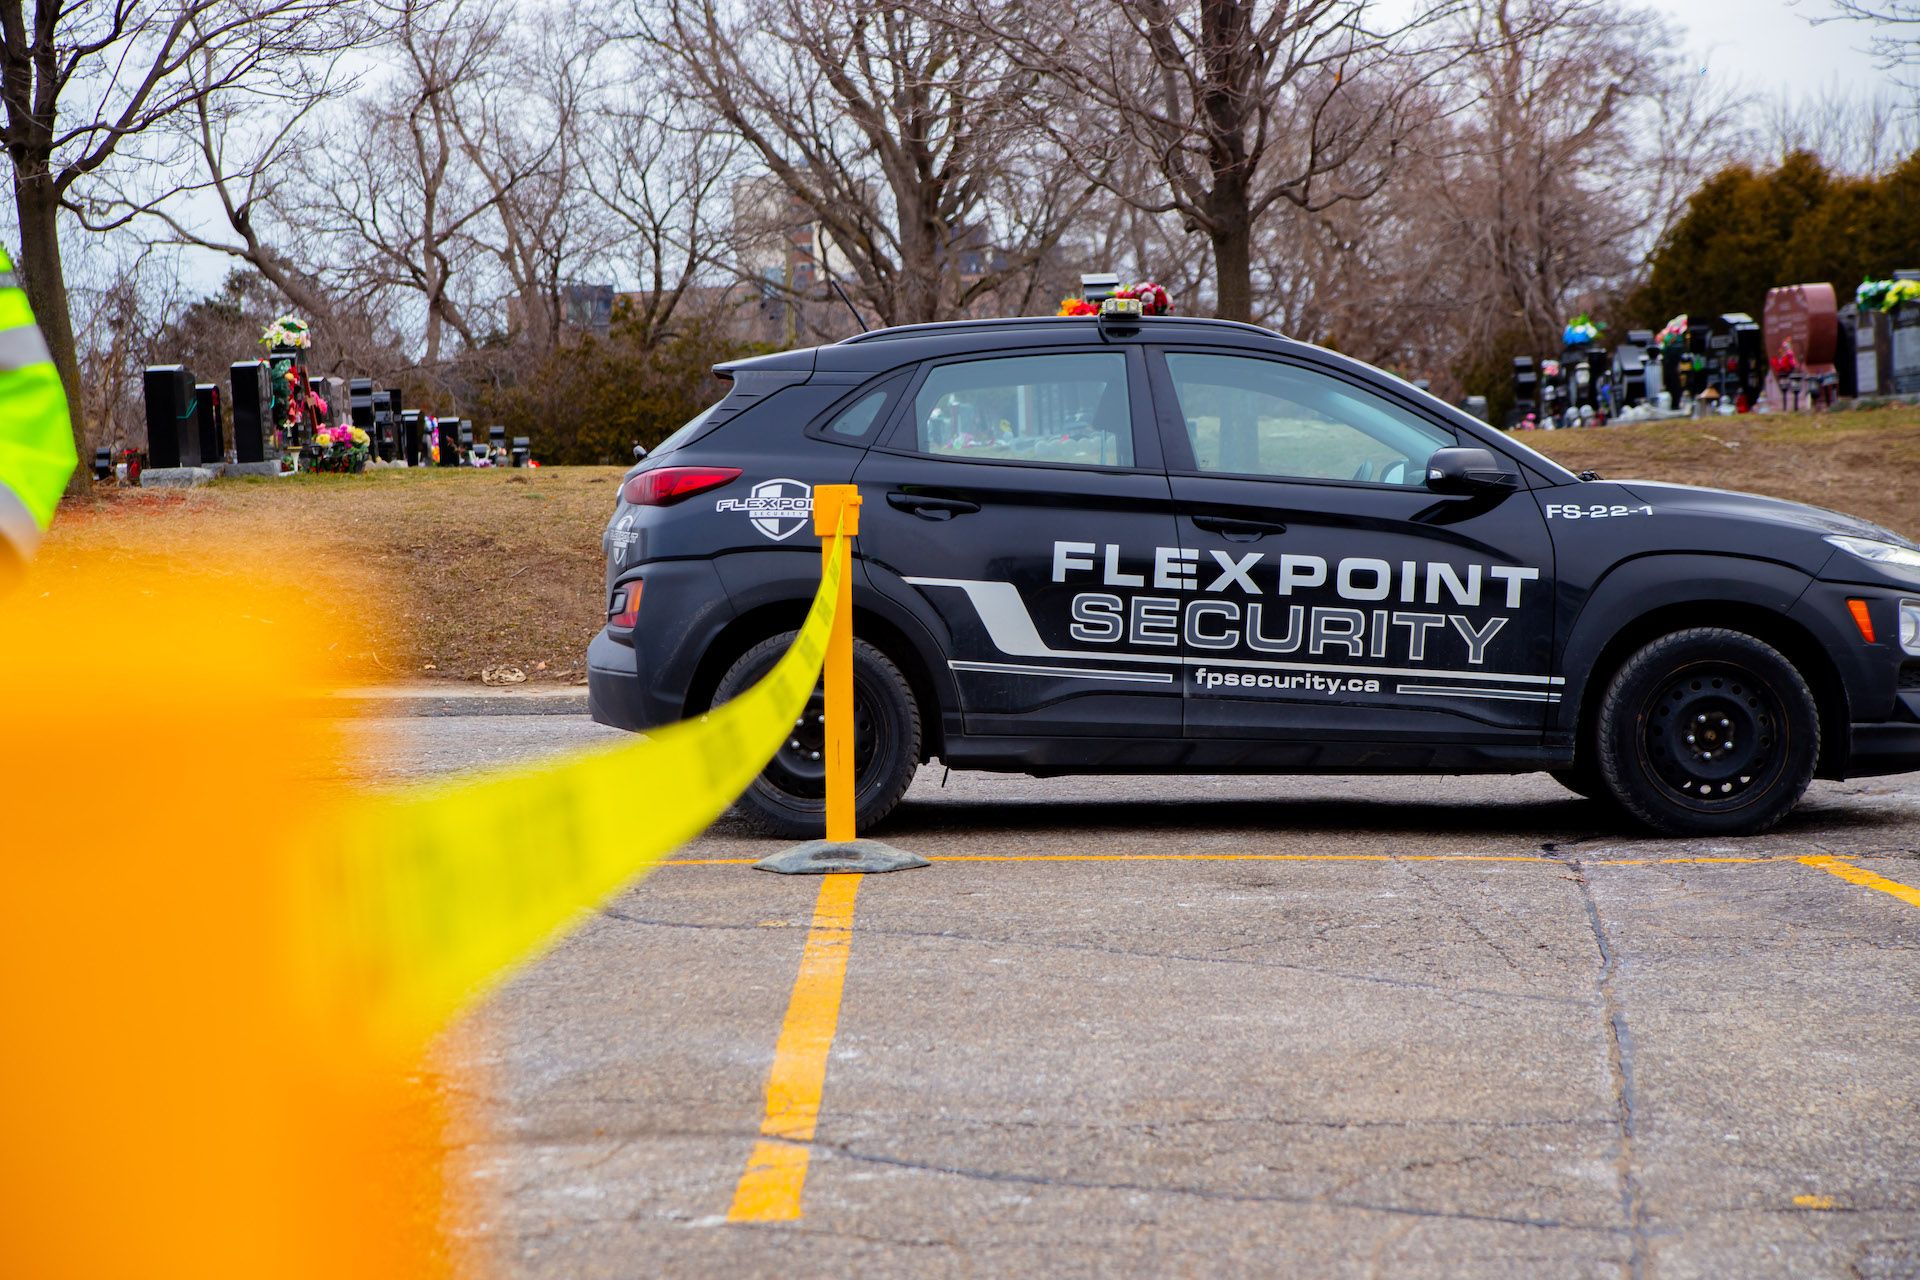 A Flex Point Security mobile patrol vehicle parked in a parking lot next to two pylons that have yellow caution tape between them